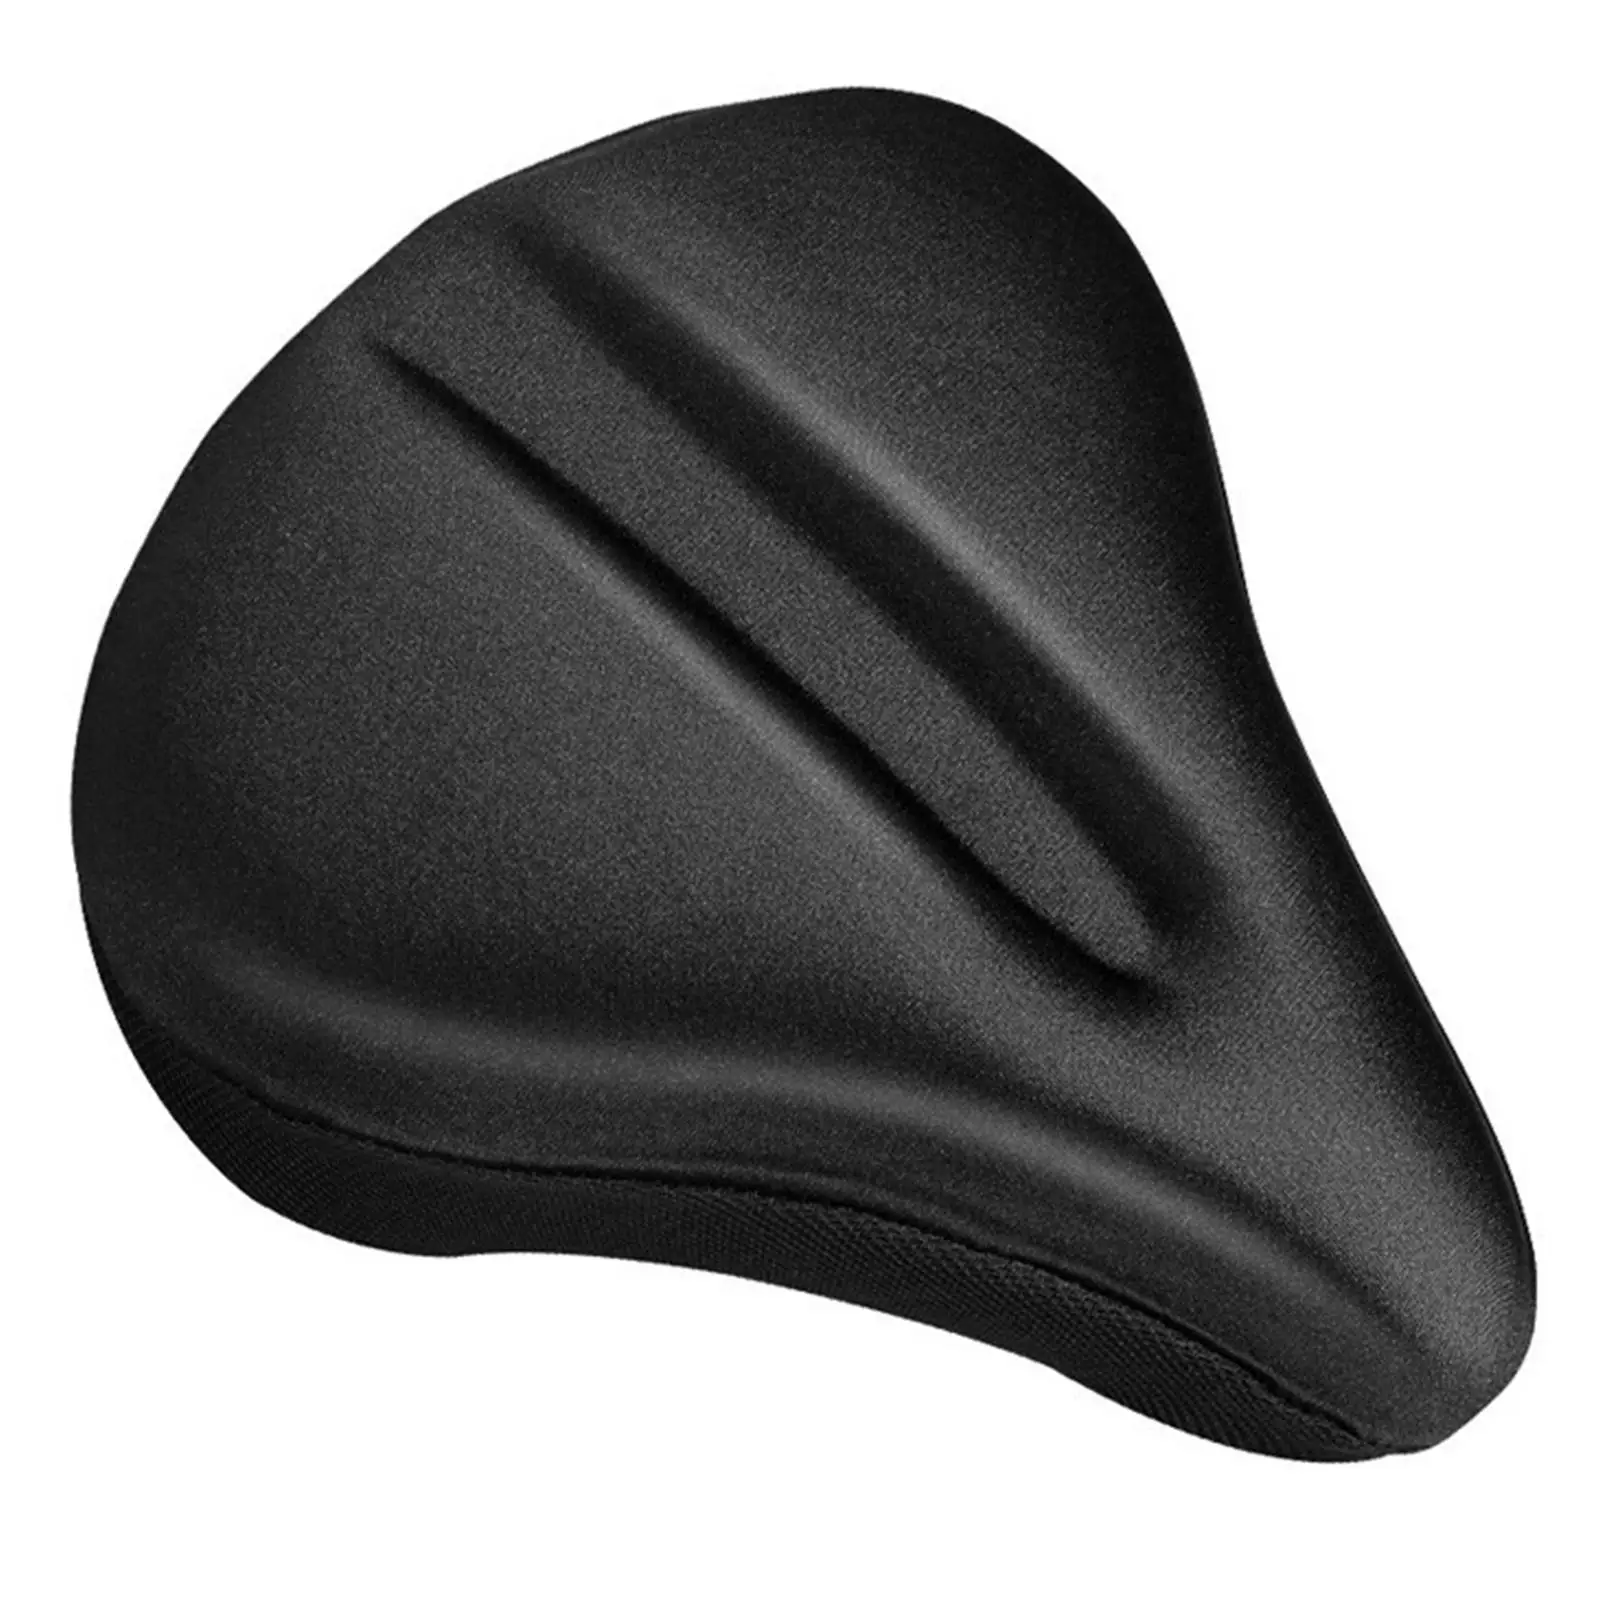 Bike Seat Cover Soft Comfortable Bicycle Saddle Cover for Exercise Bike Road Bike Folding Bike Outdoor Cycling Riding